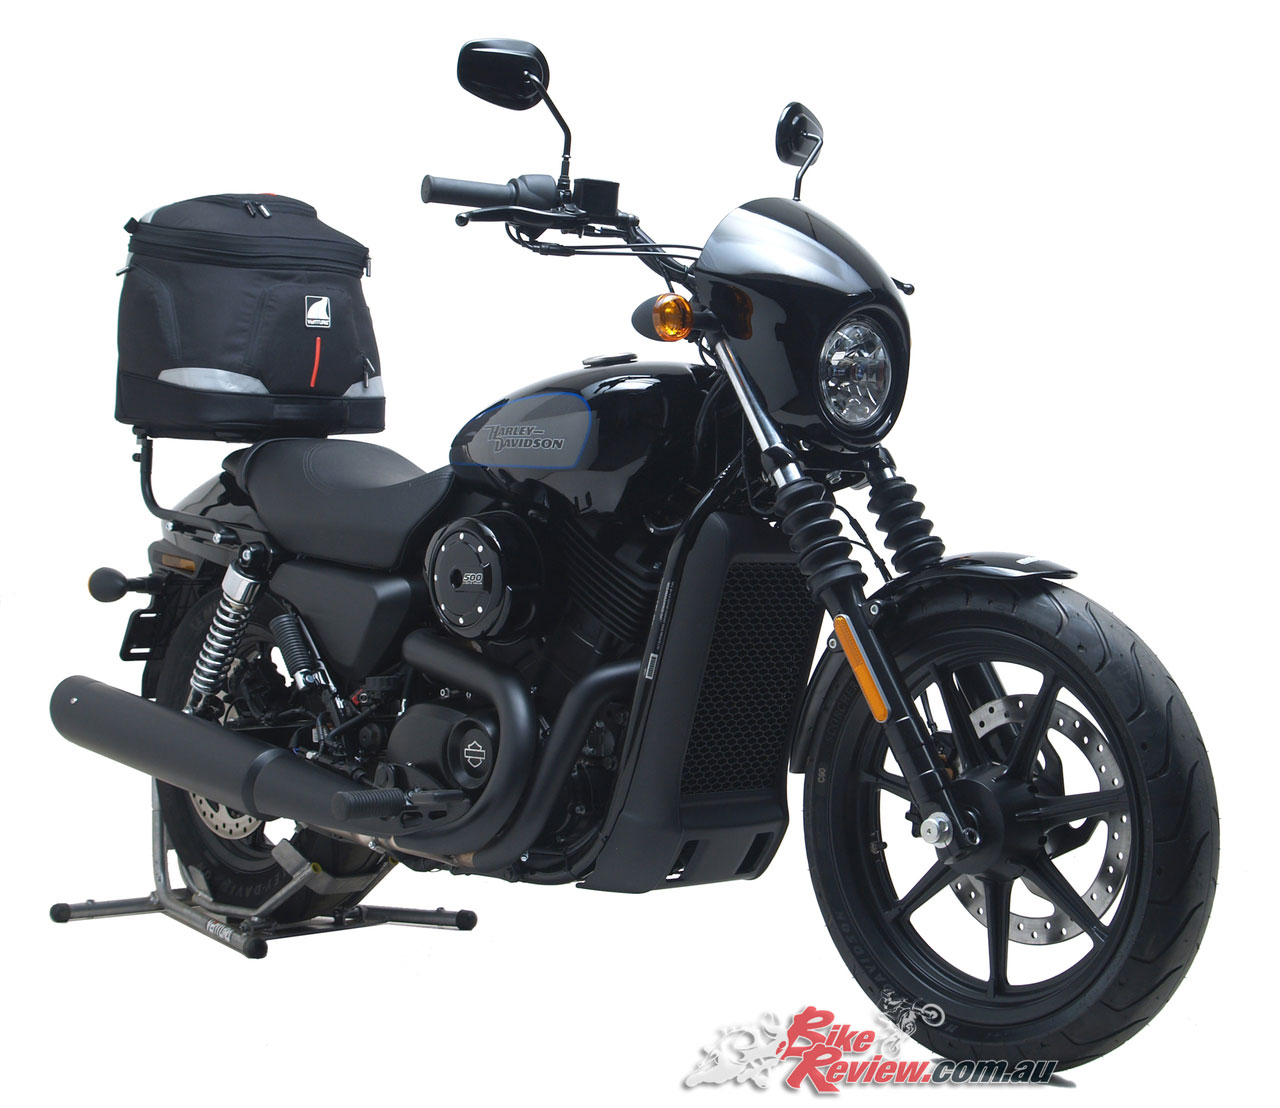 New Product Ventura Available For Harley Street 500 Bike Review